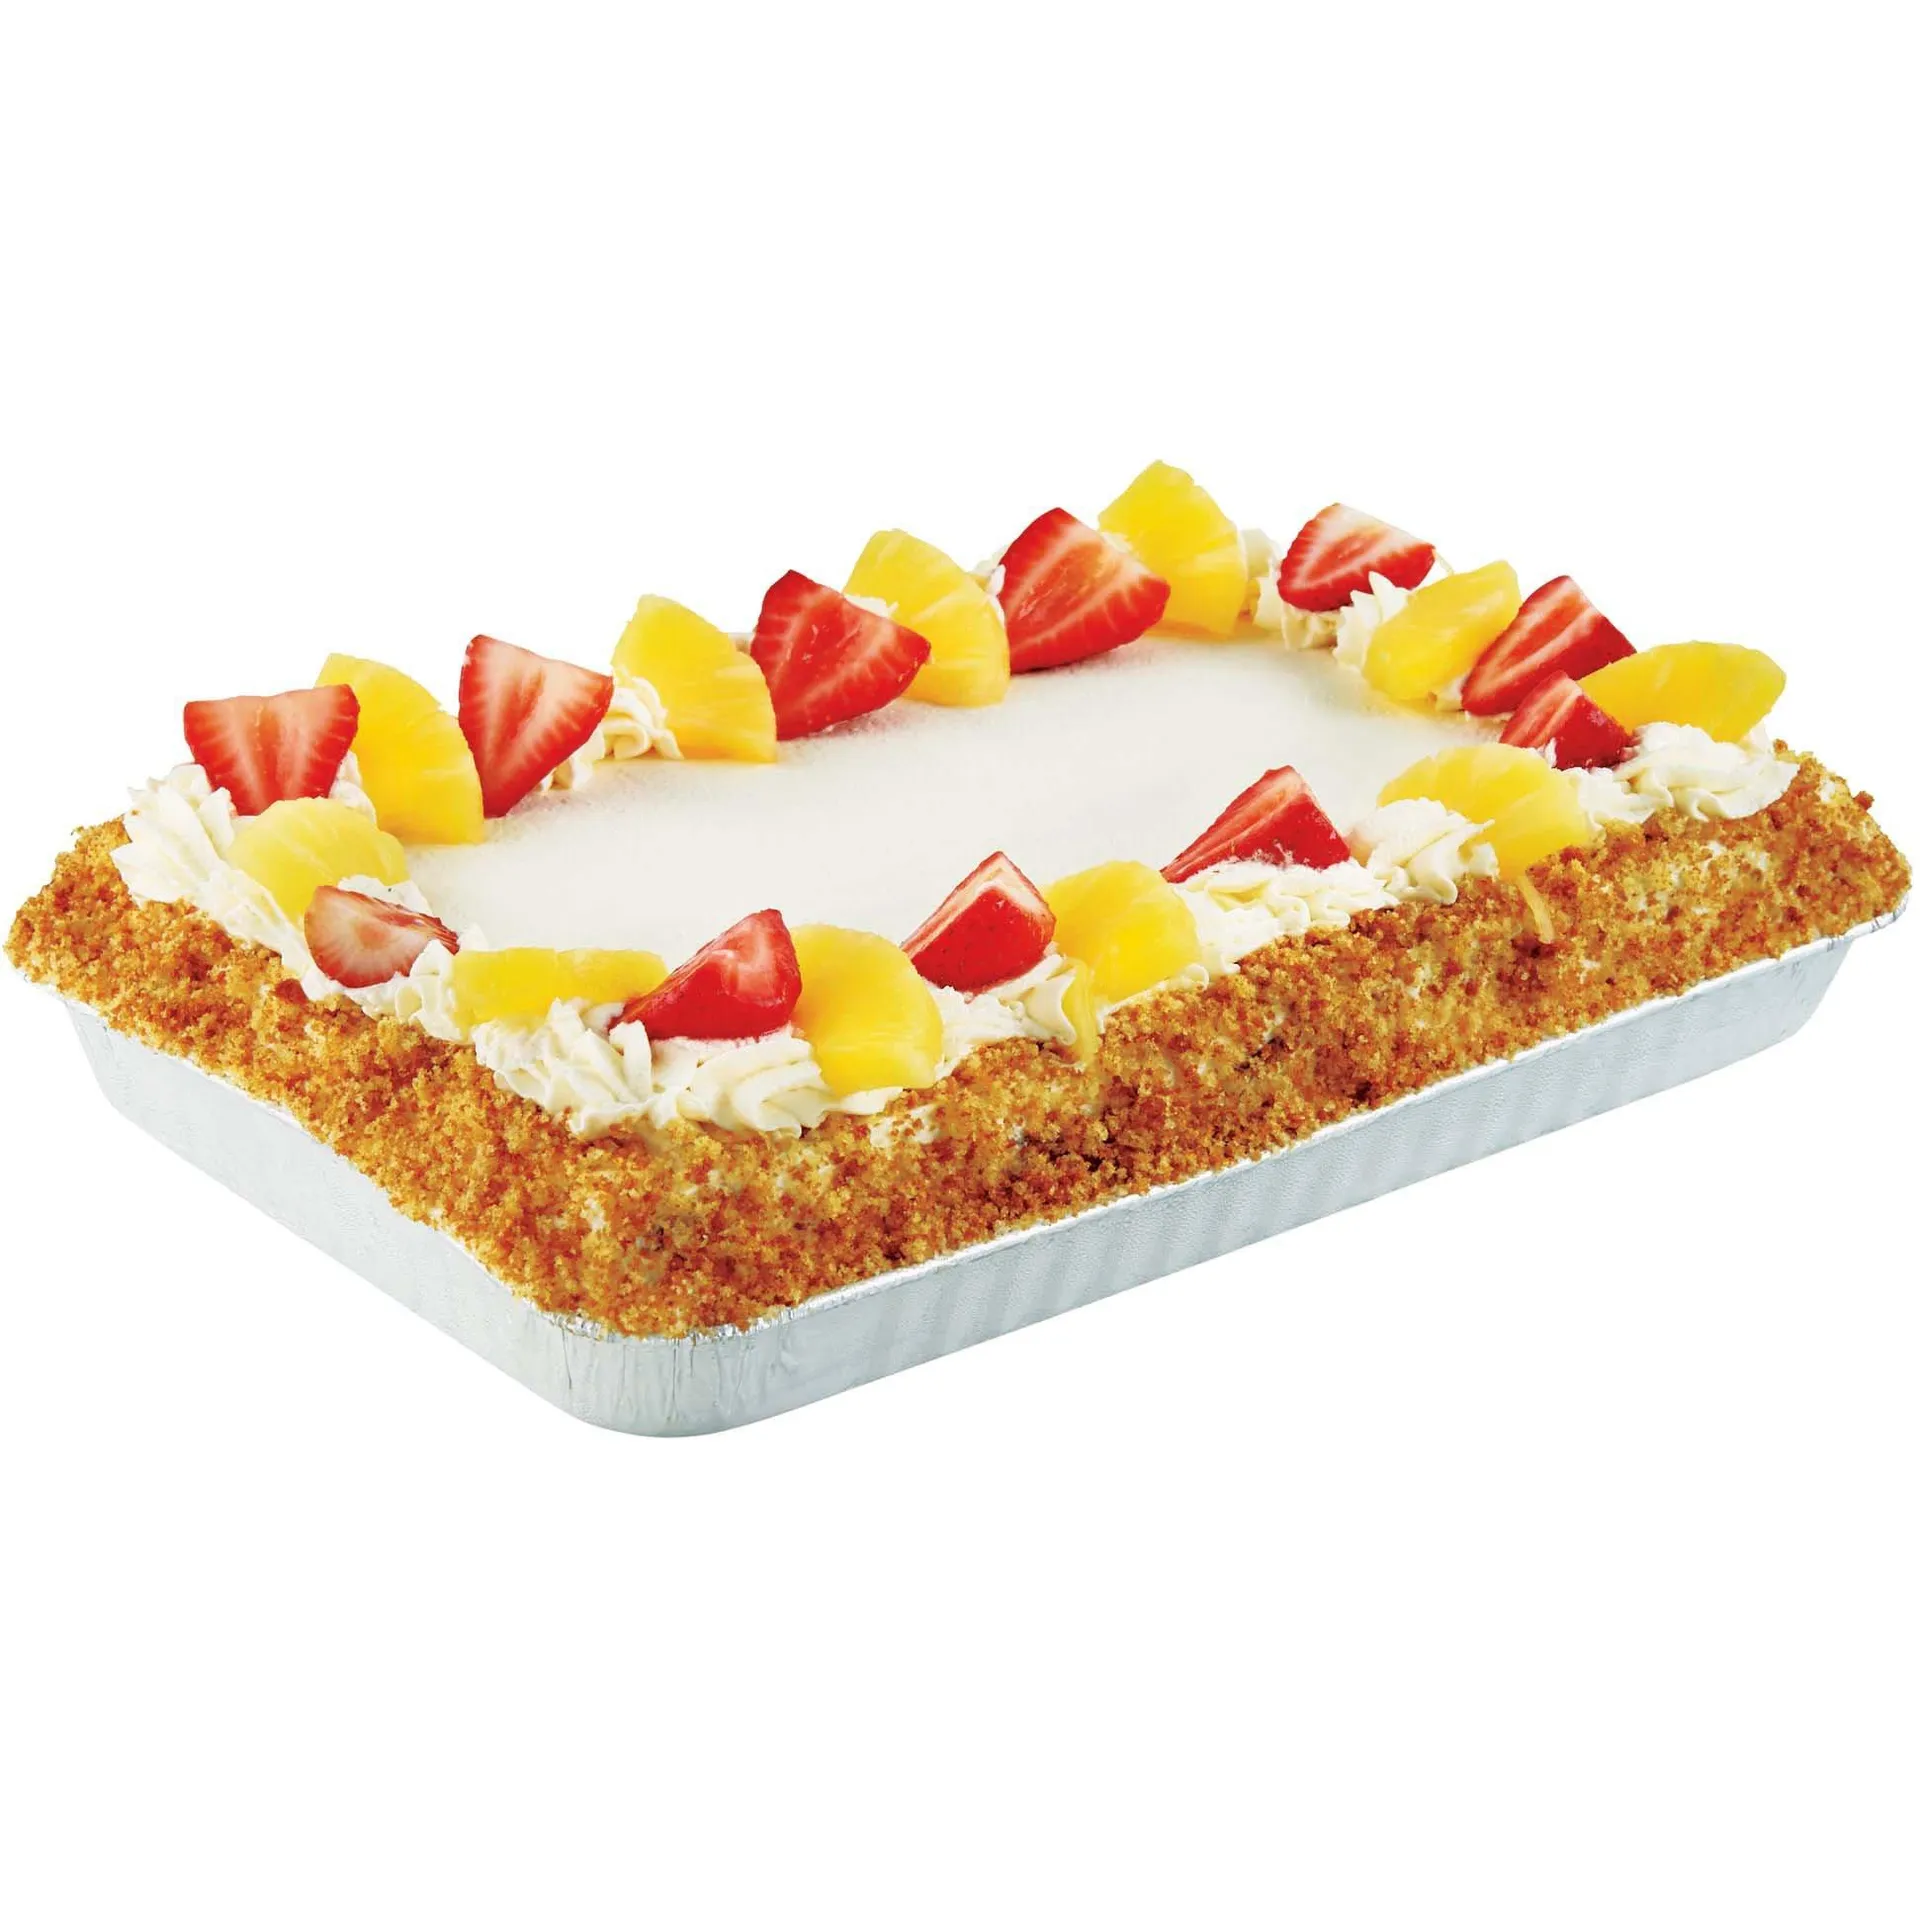 H‑E‑B Bakery Two Fruit Tres Leches Cake